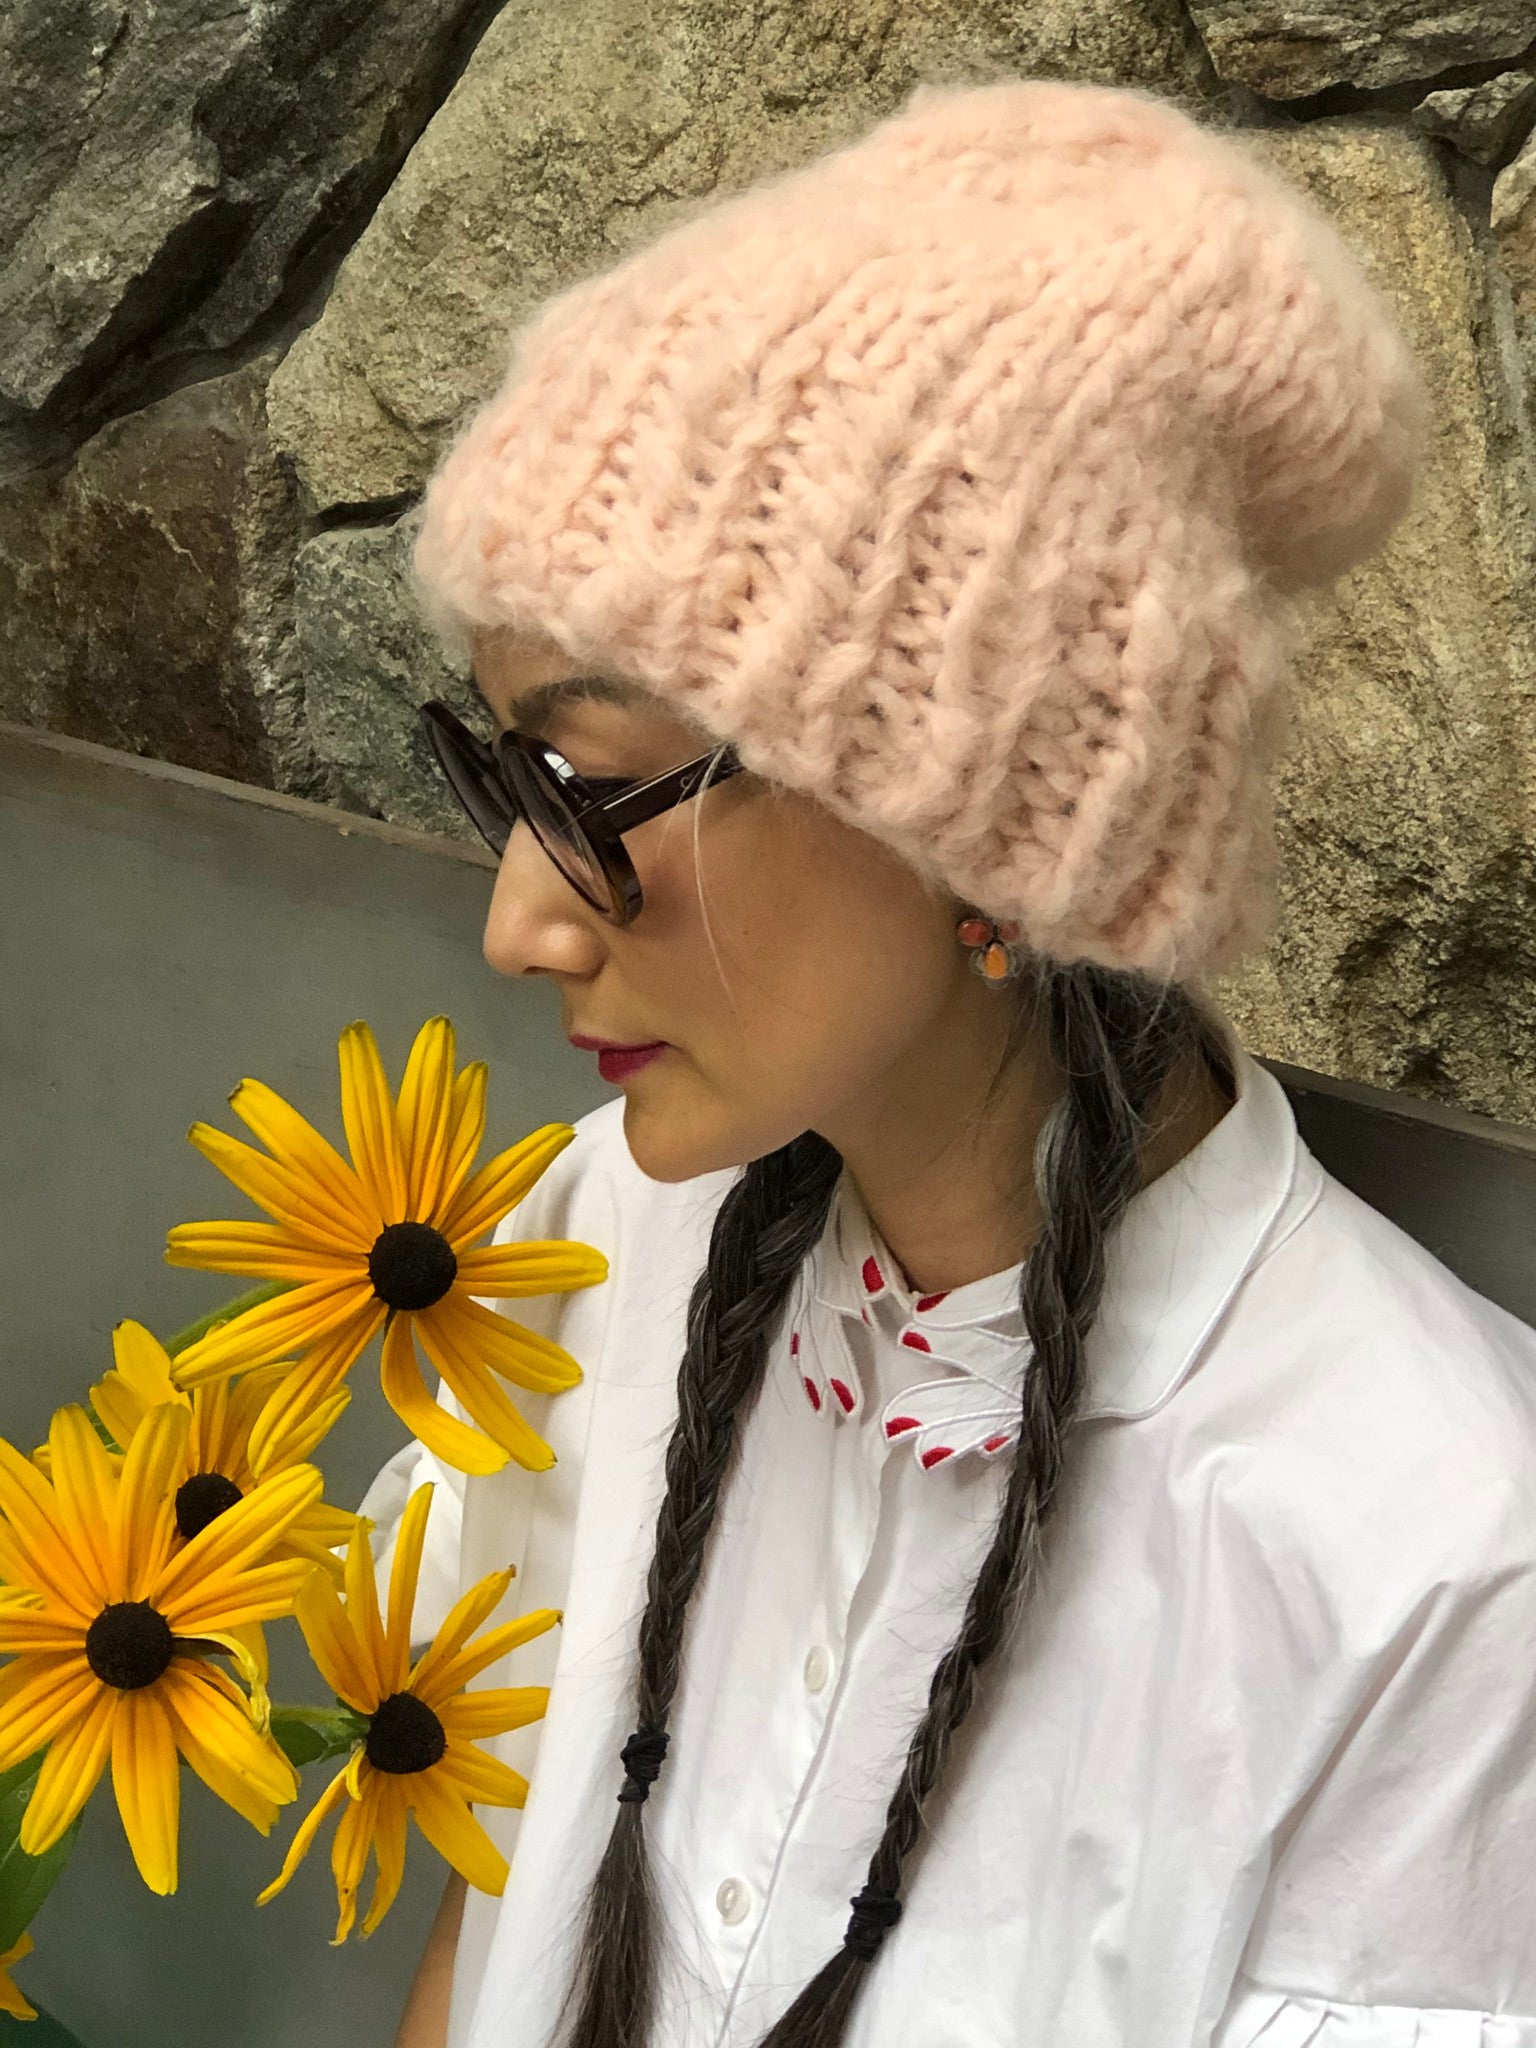 Slouchy Beanie-Solid and Stripe PATTERN - Fluffy Alpaca